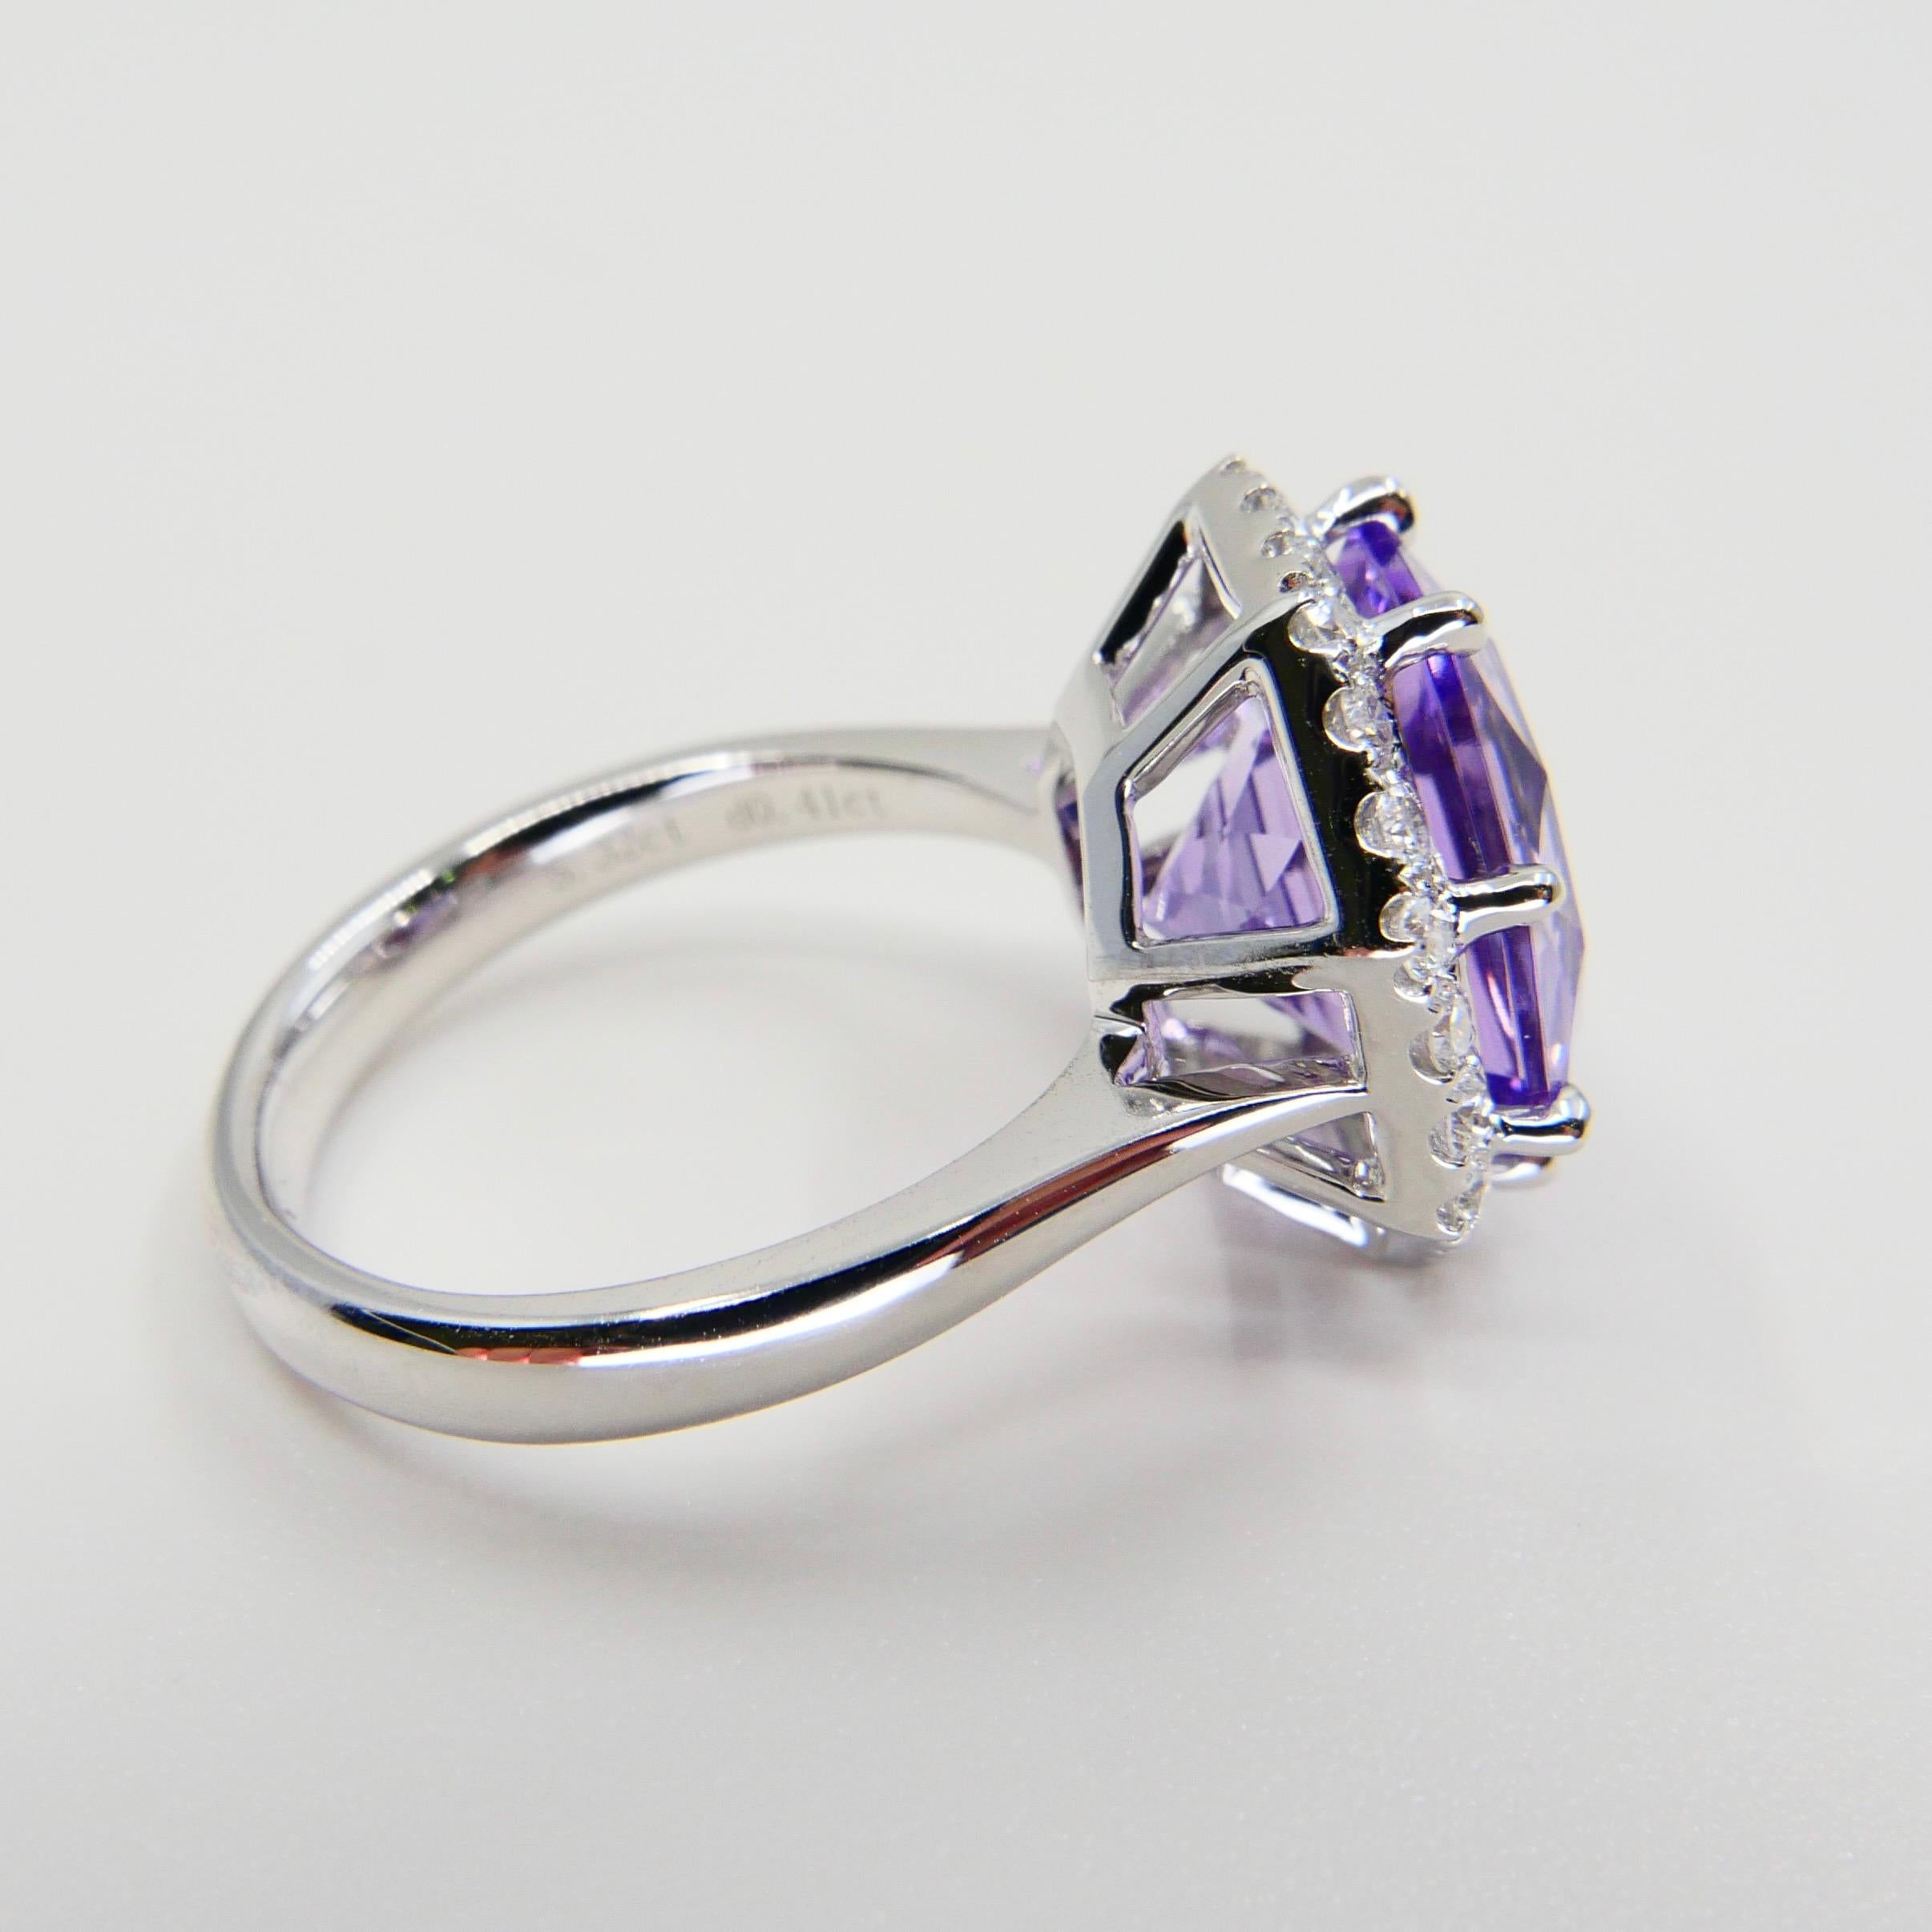 5.32 Carat Flower Cut Amethyst and Diamond Cocktail Ring, Statement Ring 6